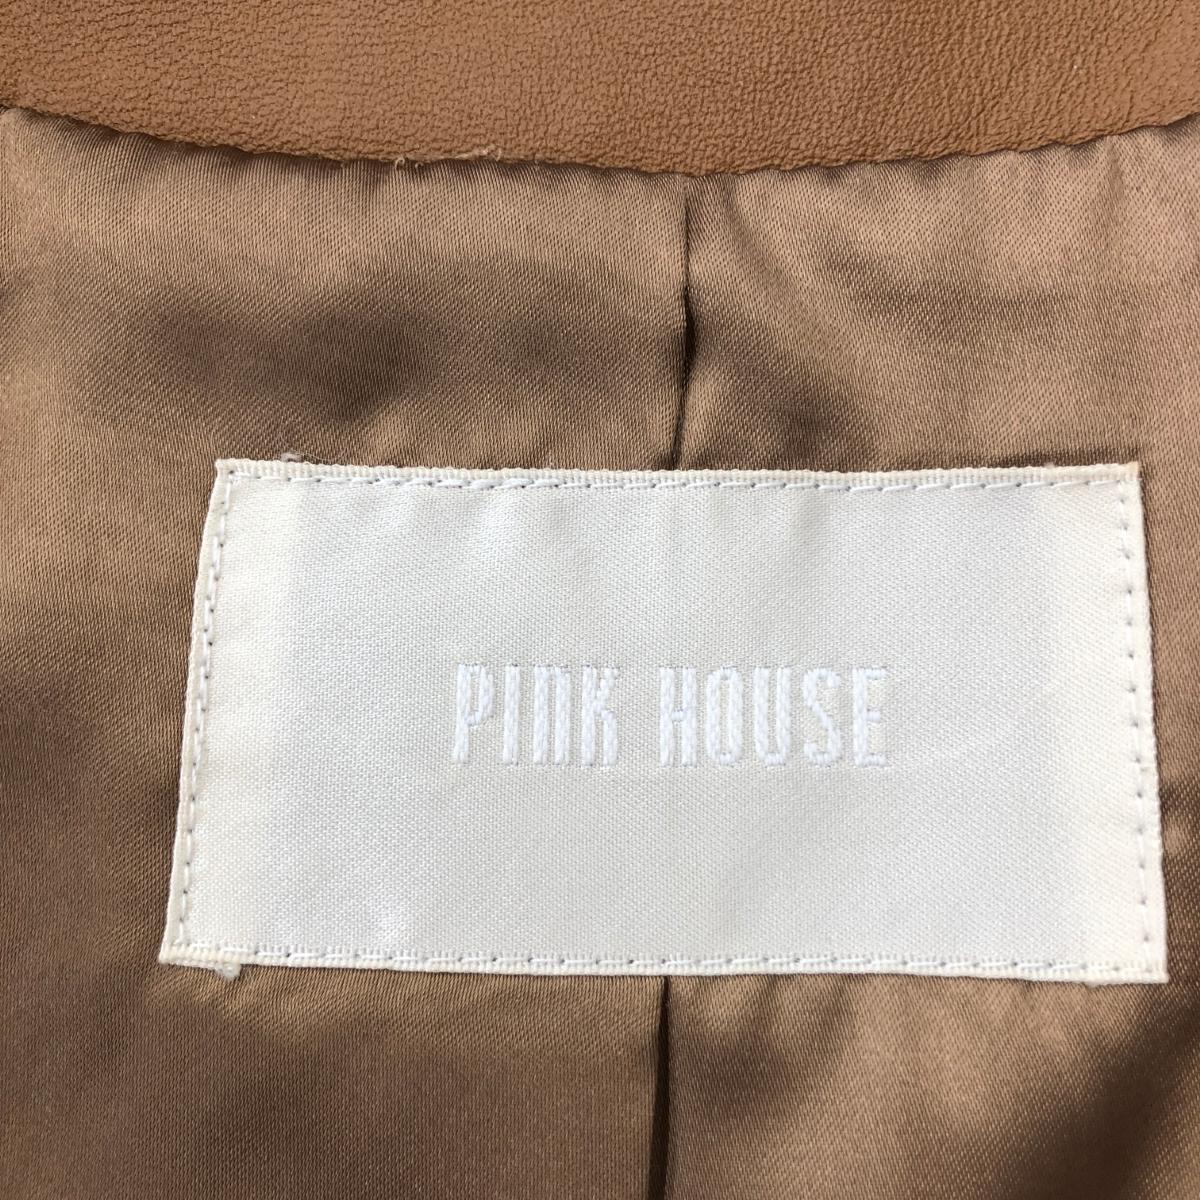 *PINK HOUSE Pink House leather jacket size M* Brown sheep leather lady's outer tia-do Zip up 